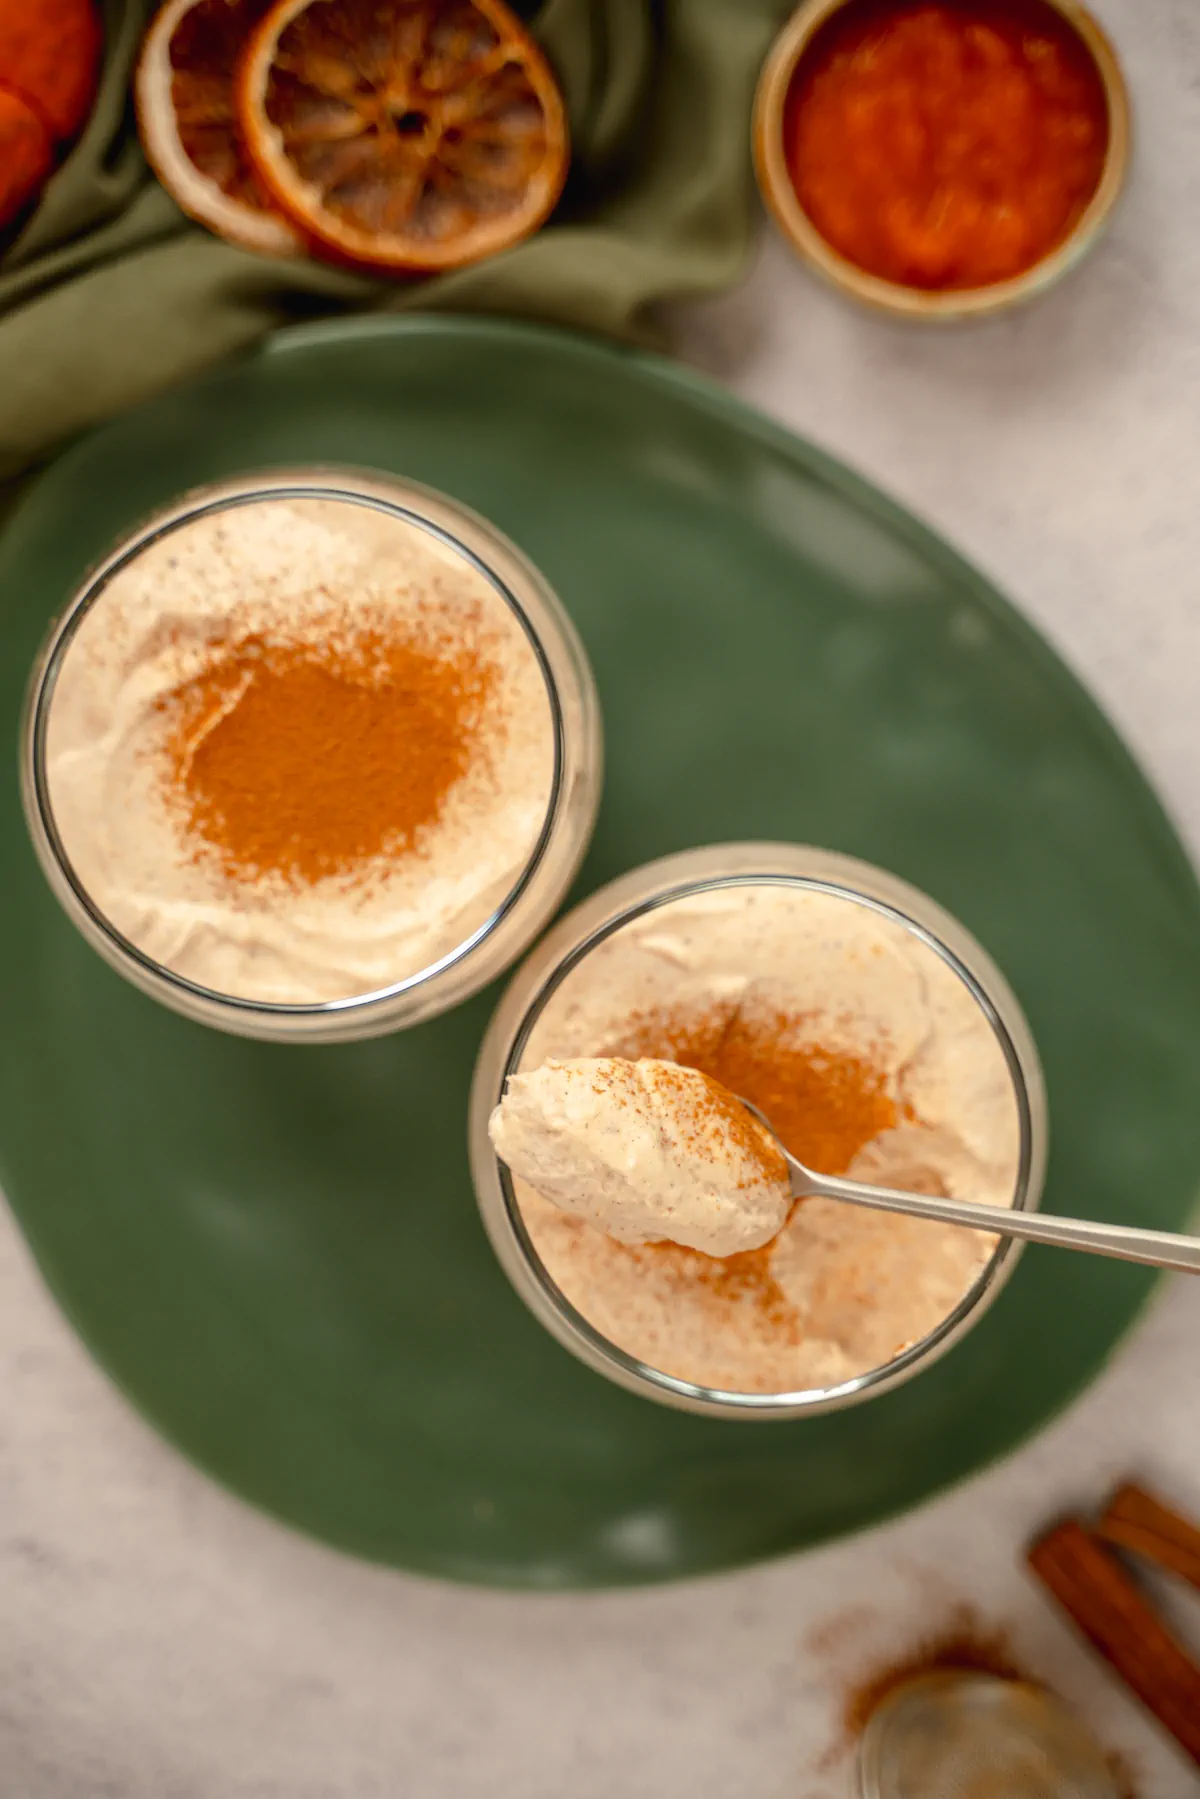 Homemade keto pumpkin cheesecake mousse served in two transparent glasses garnished with cinnamon powder, where one glass remains untouched, while some portions is eaten from the other glass and a spoonful is ready to be eaten too.